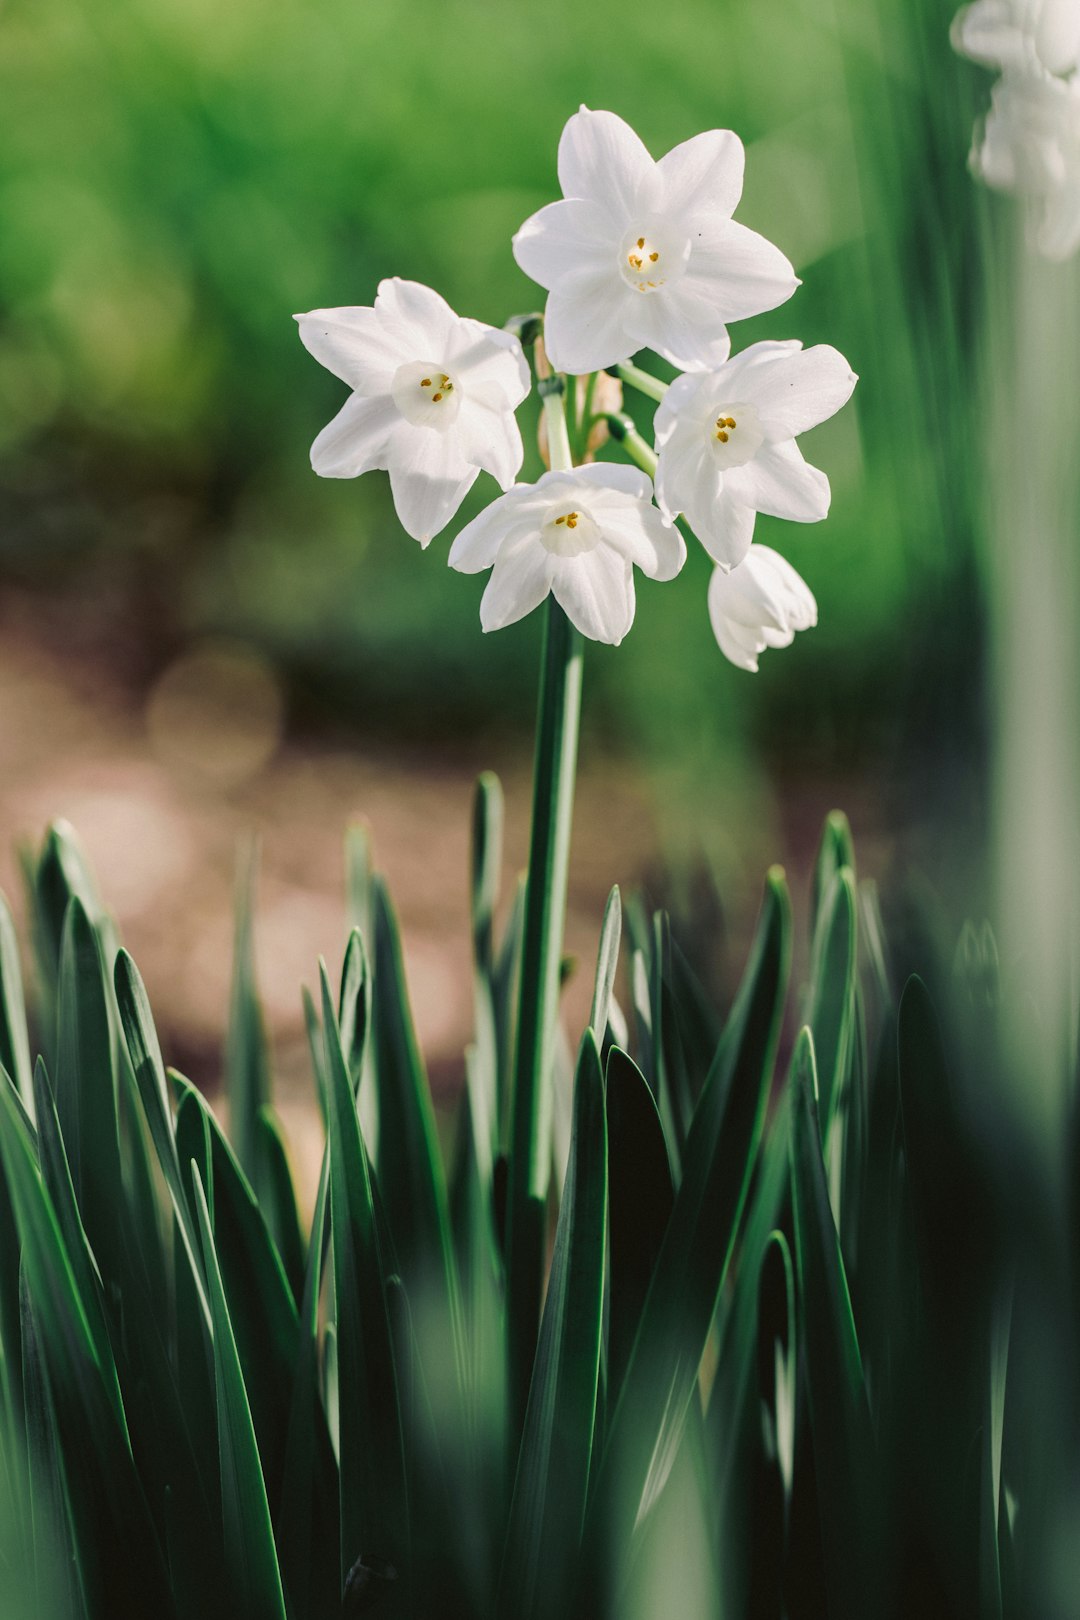 paperwhite daffodils in bloom close-up photography